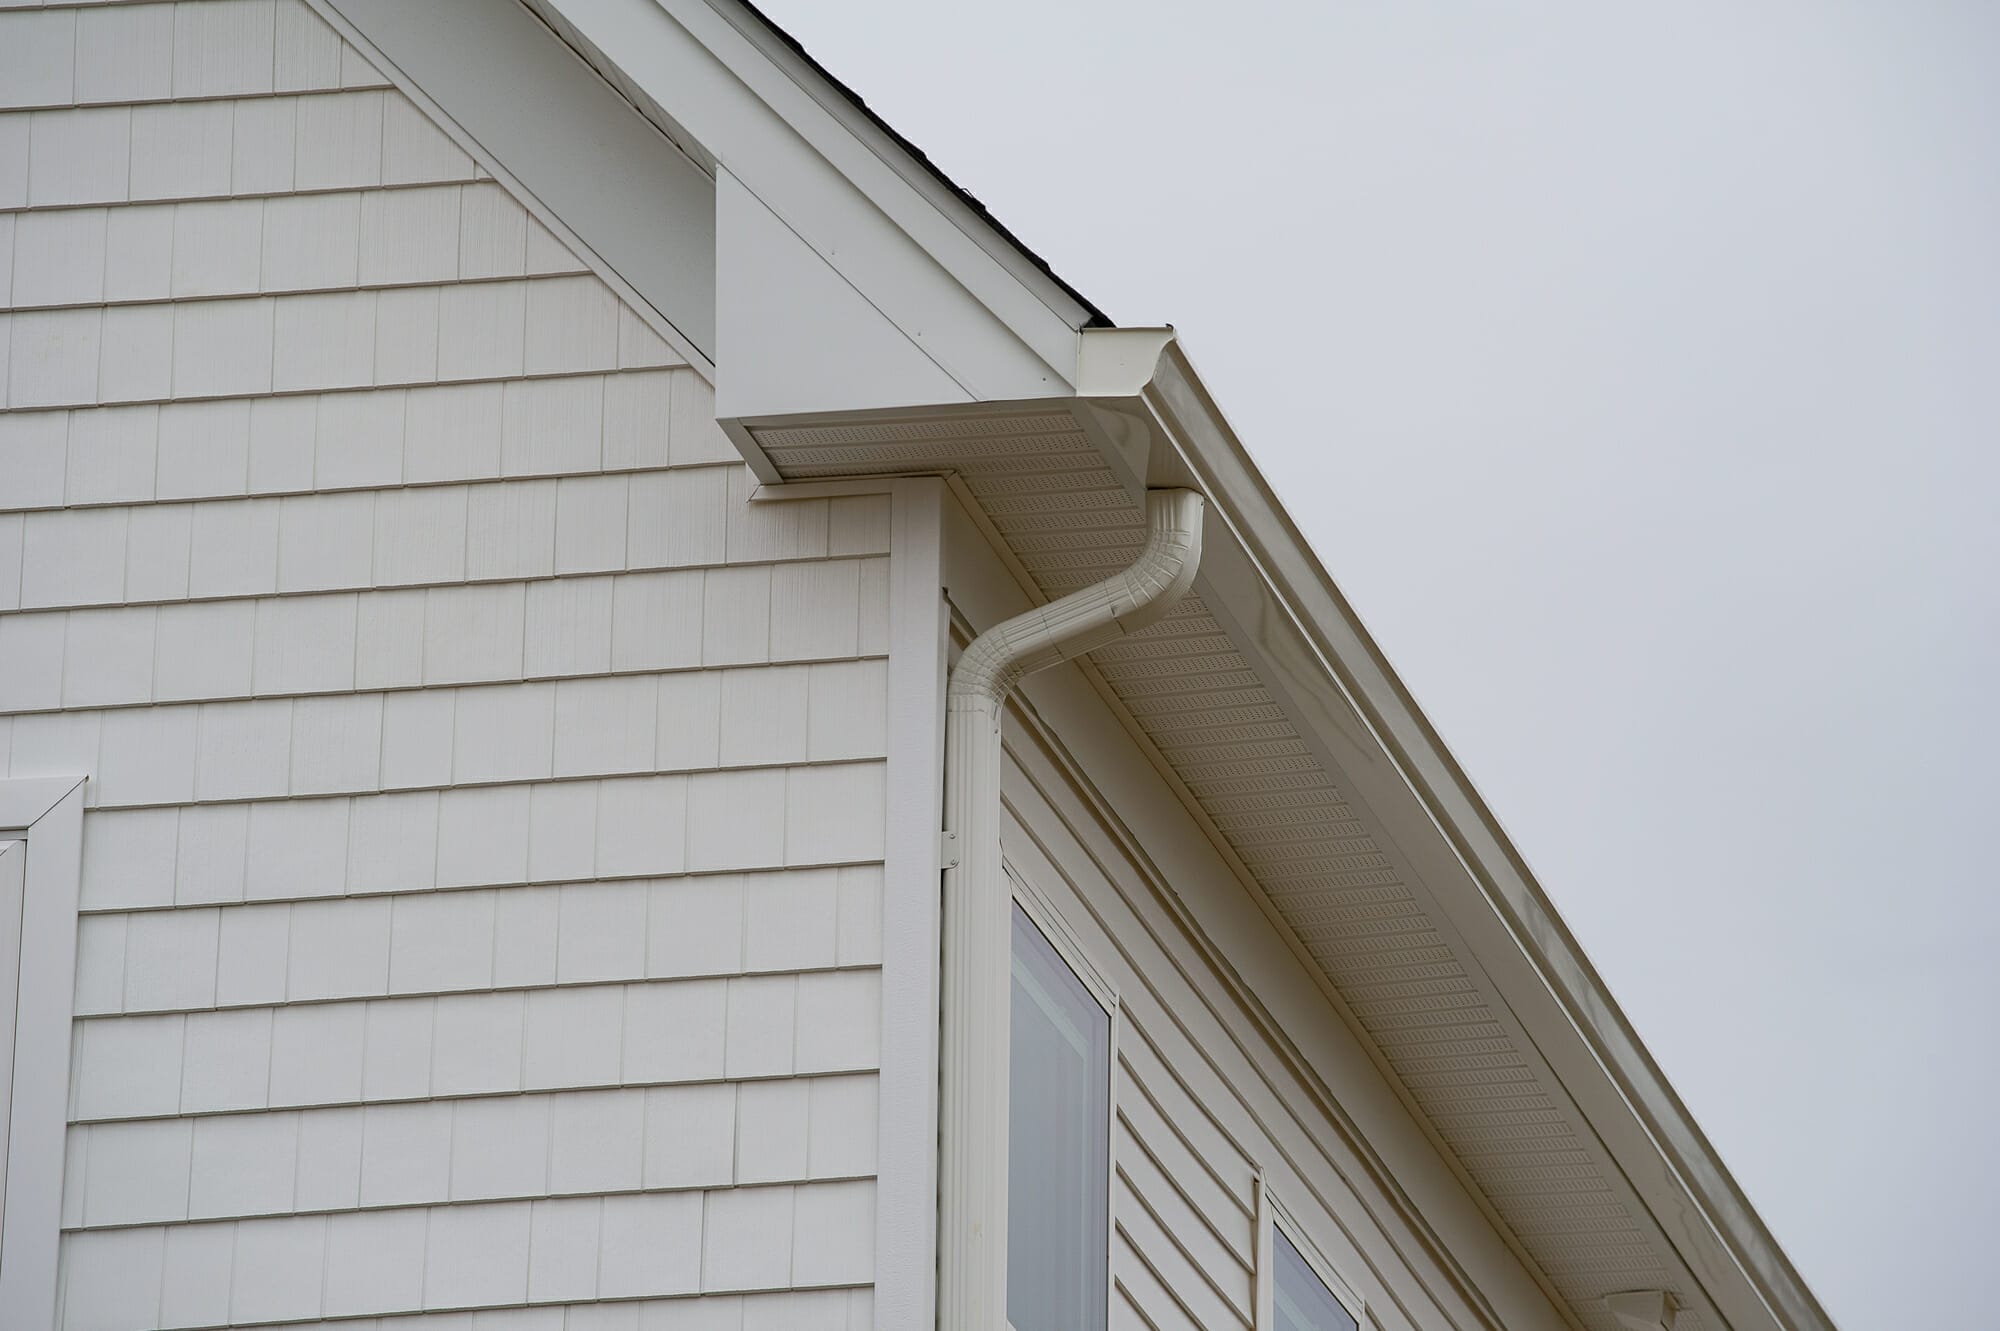 new gutter cost in Sarasota